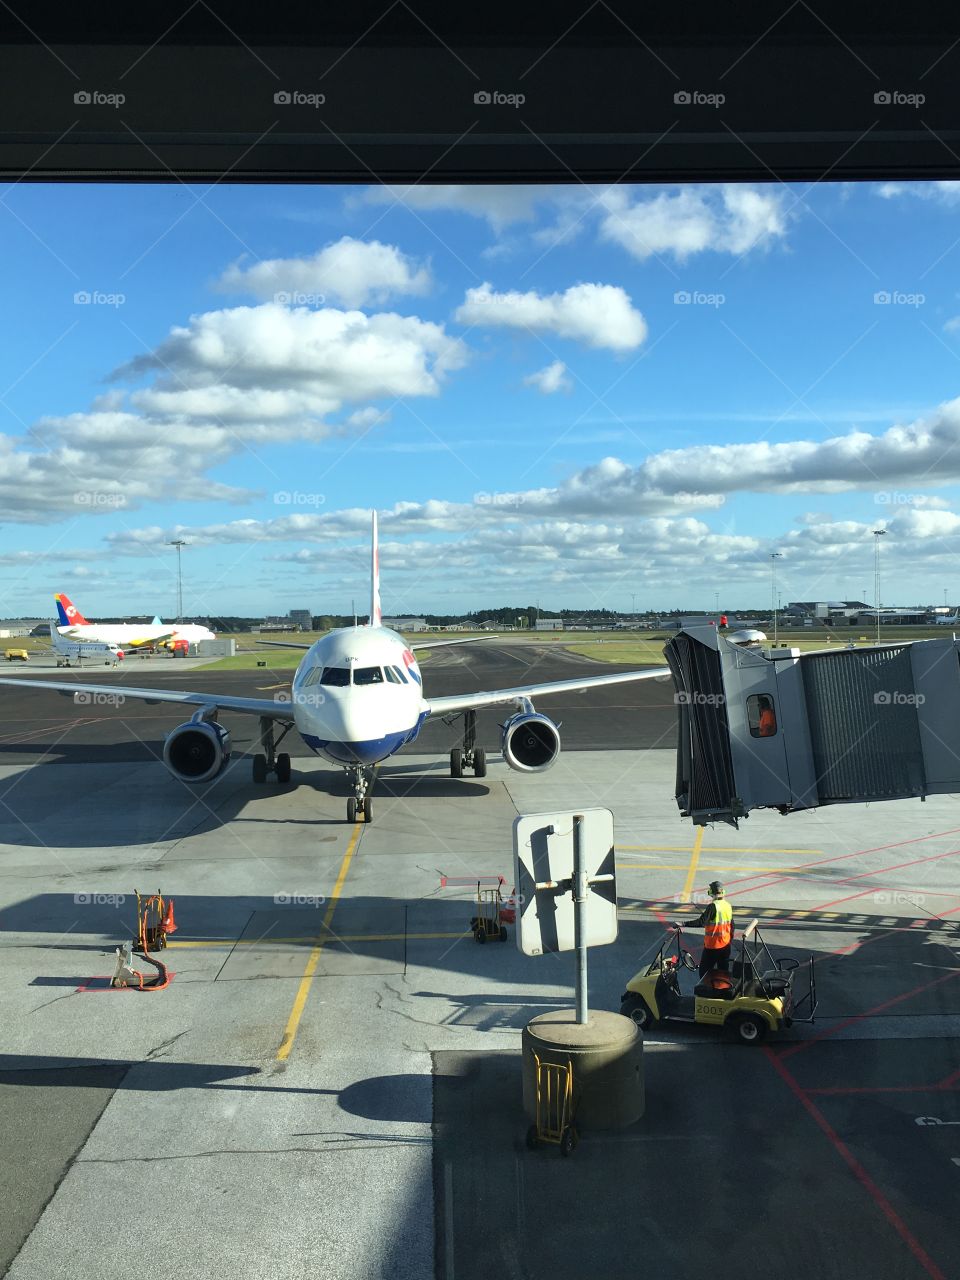 Plane at the gate